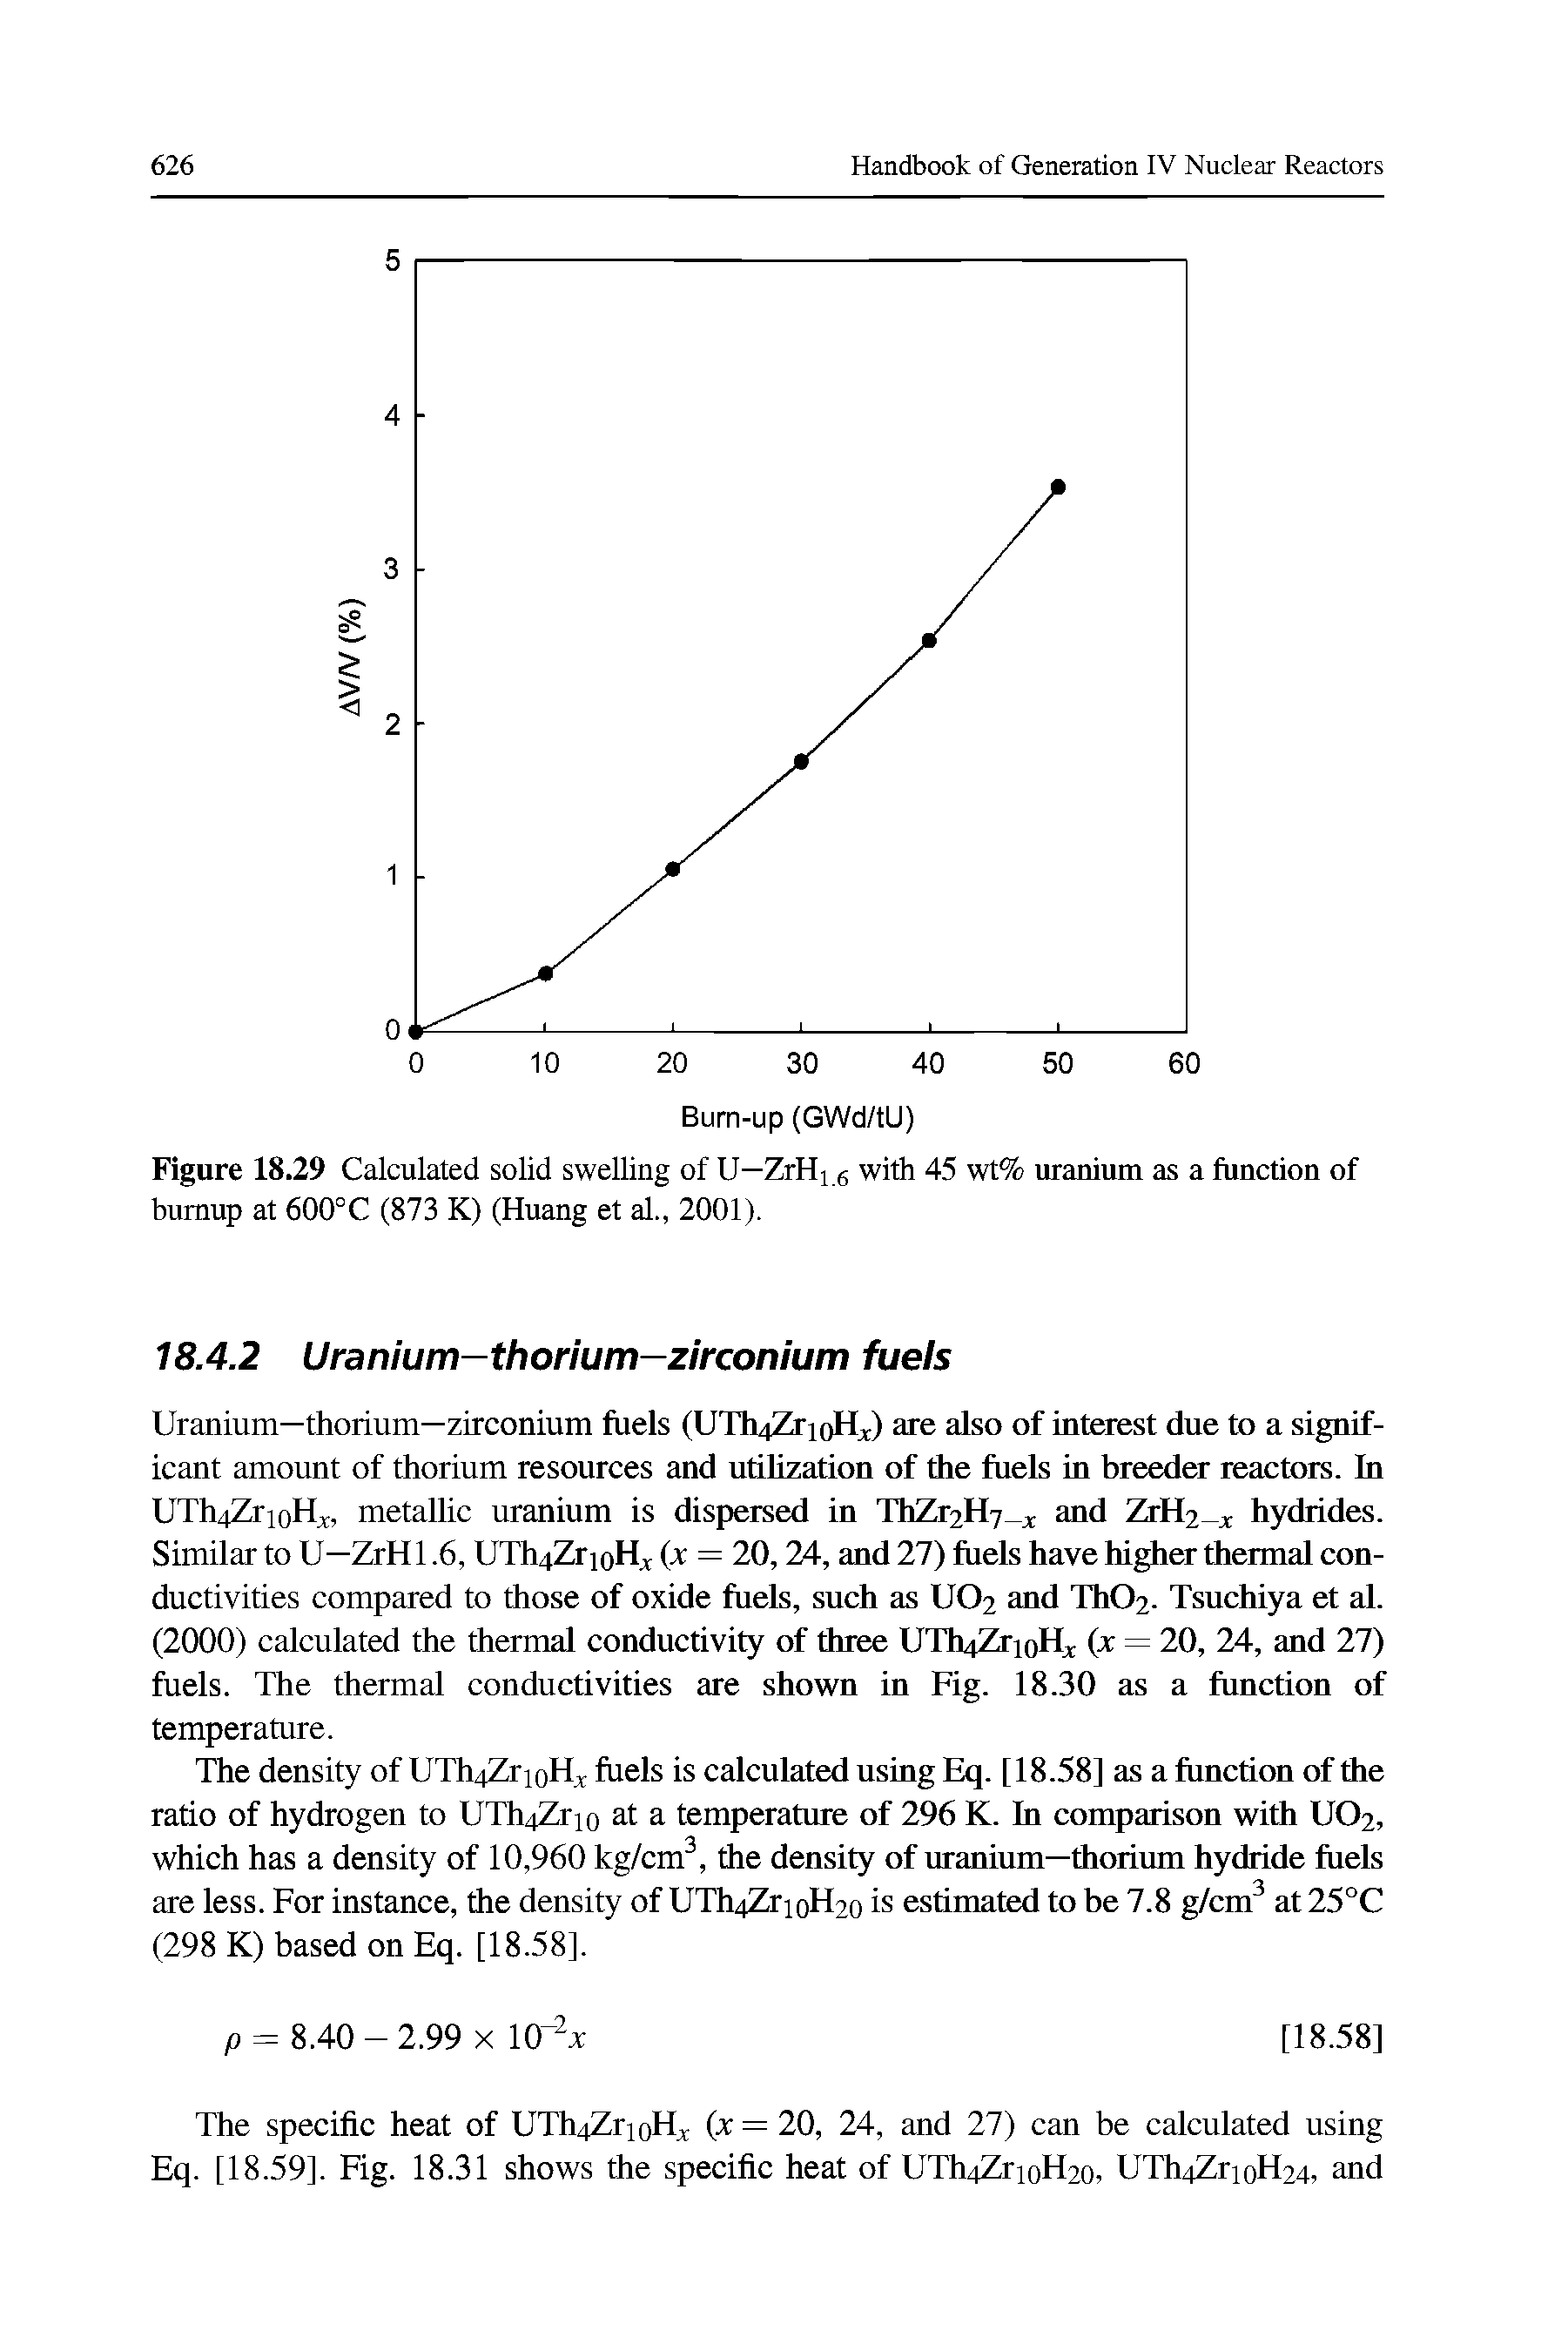 Figure 18.29 Calculated solid swelling of U-ZrHi 5 with 45 wt% uranium as a function of bumup at 600°C (873 K) (Huang et al 2001).